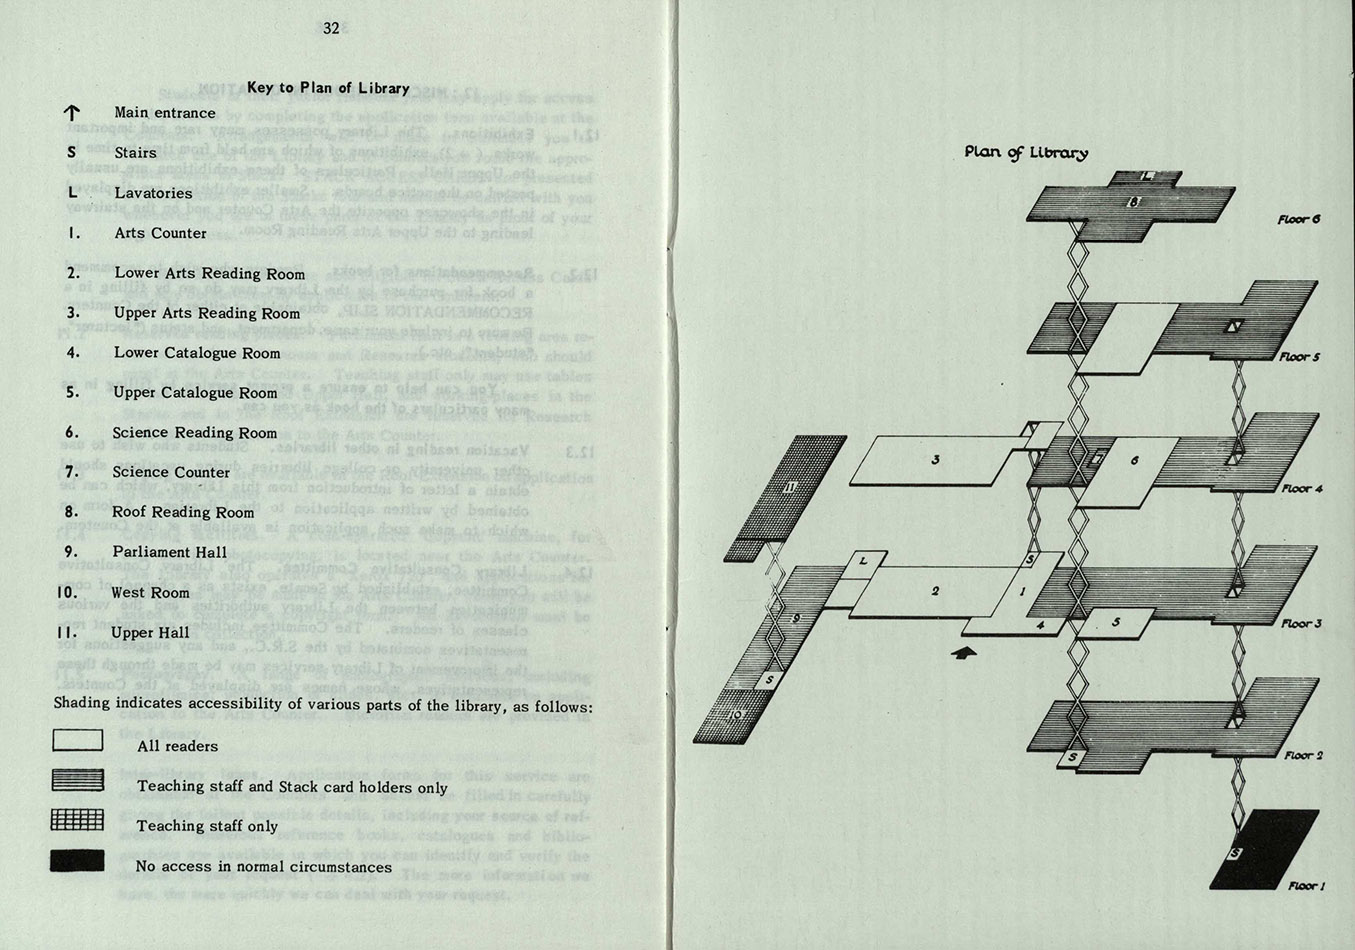 The key and plan of the Library, as it was in the academic session 1972/73.